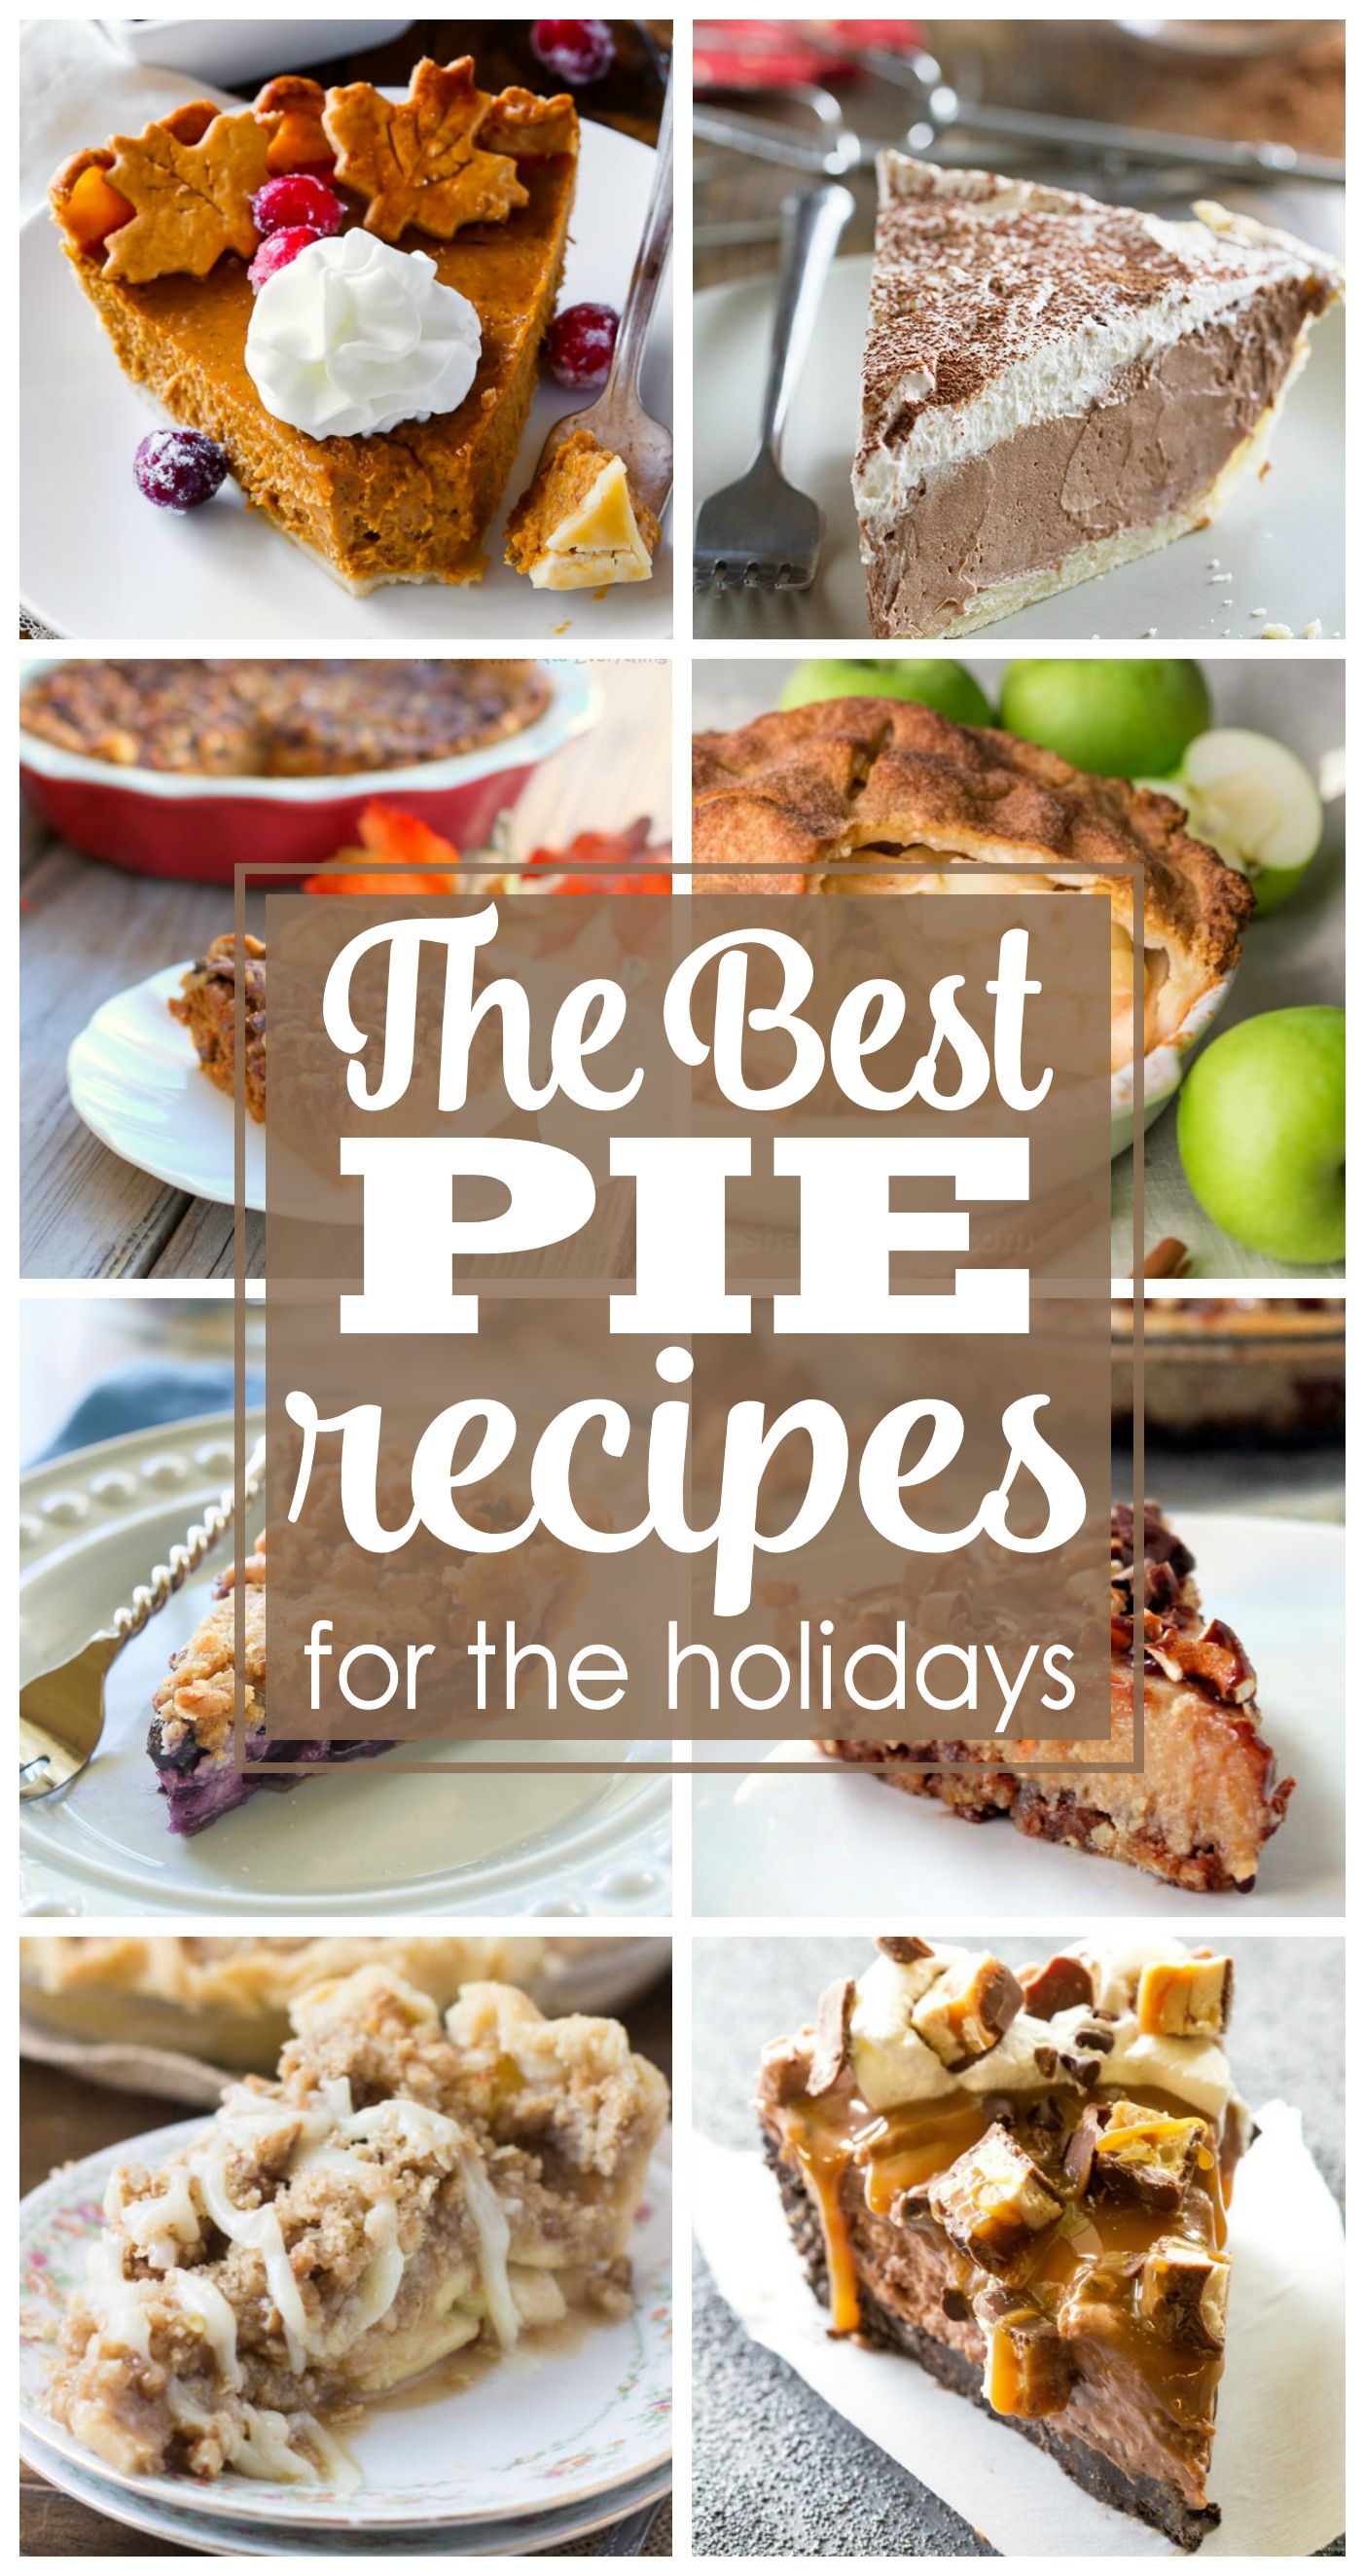 The Best Pie Recipes for the Holidays | Thanksgiving Desserts